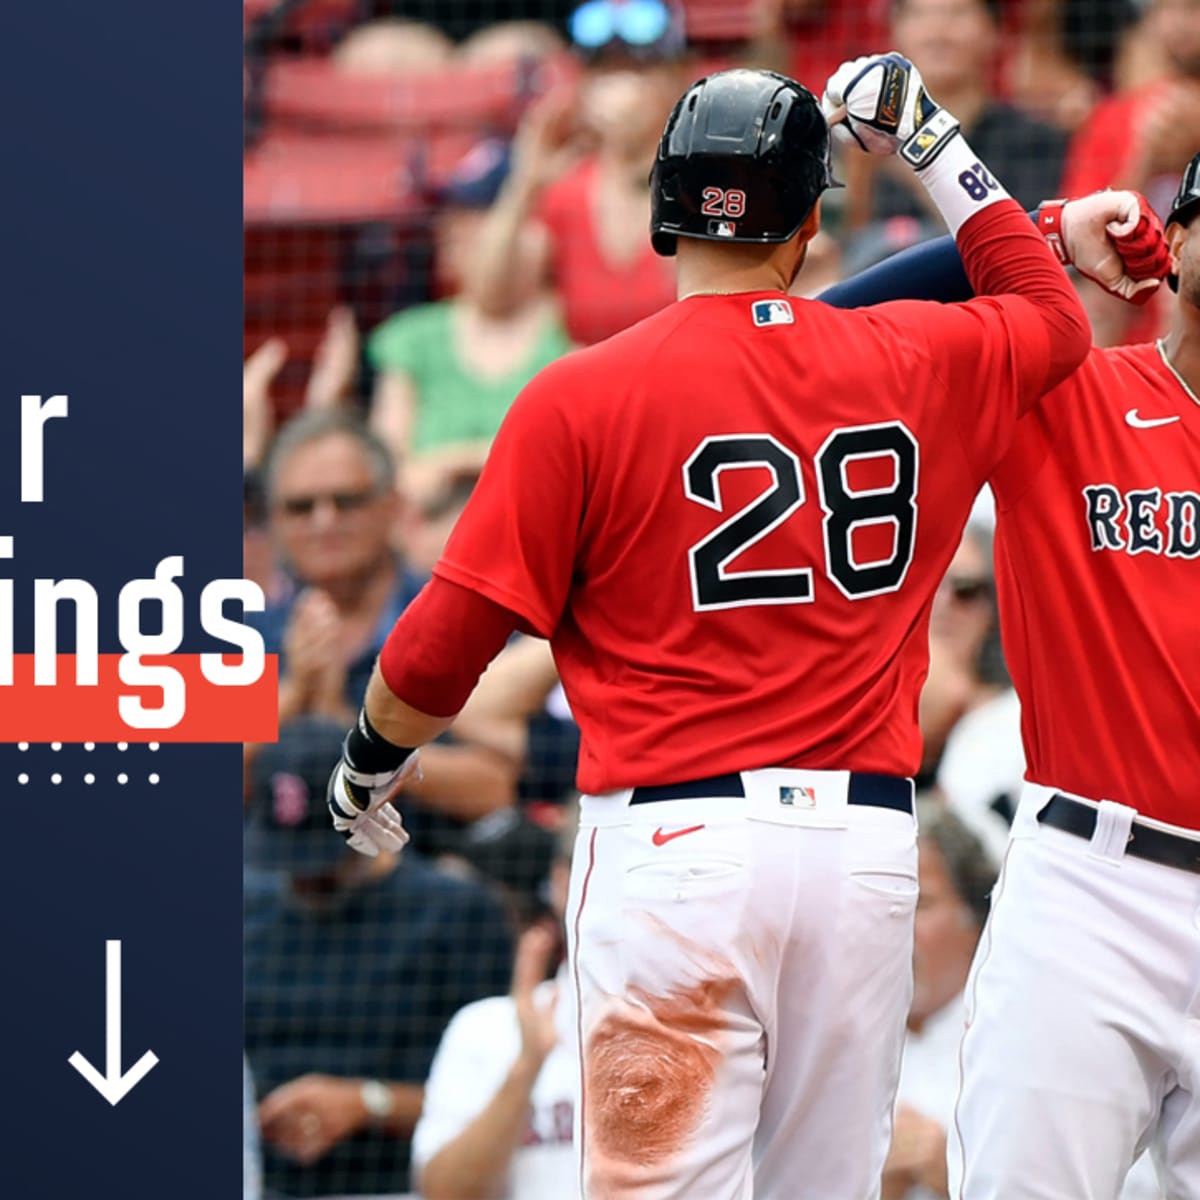 MLB - We are pleased to present to you the first power rankings of